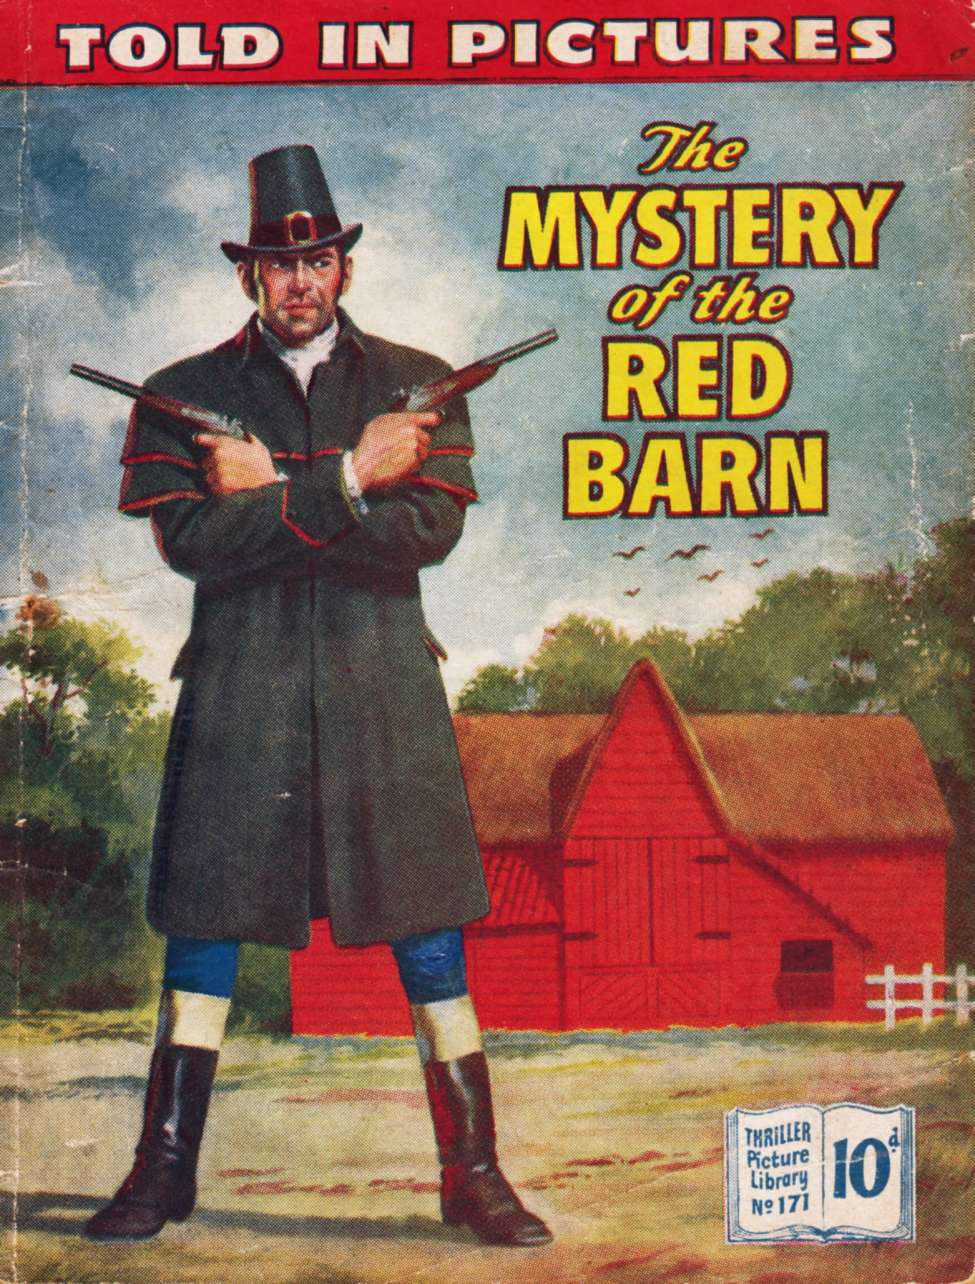 Book Cover For Thriller Picture Library 171 - The Mystery of the Red Barn